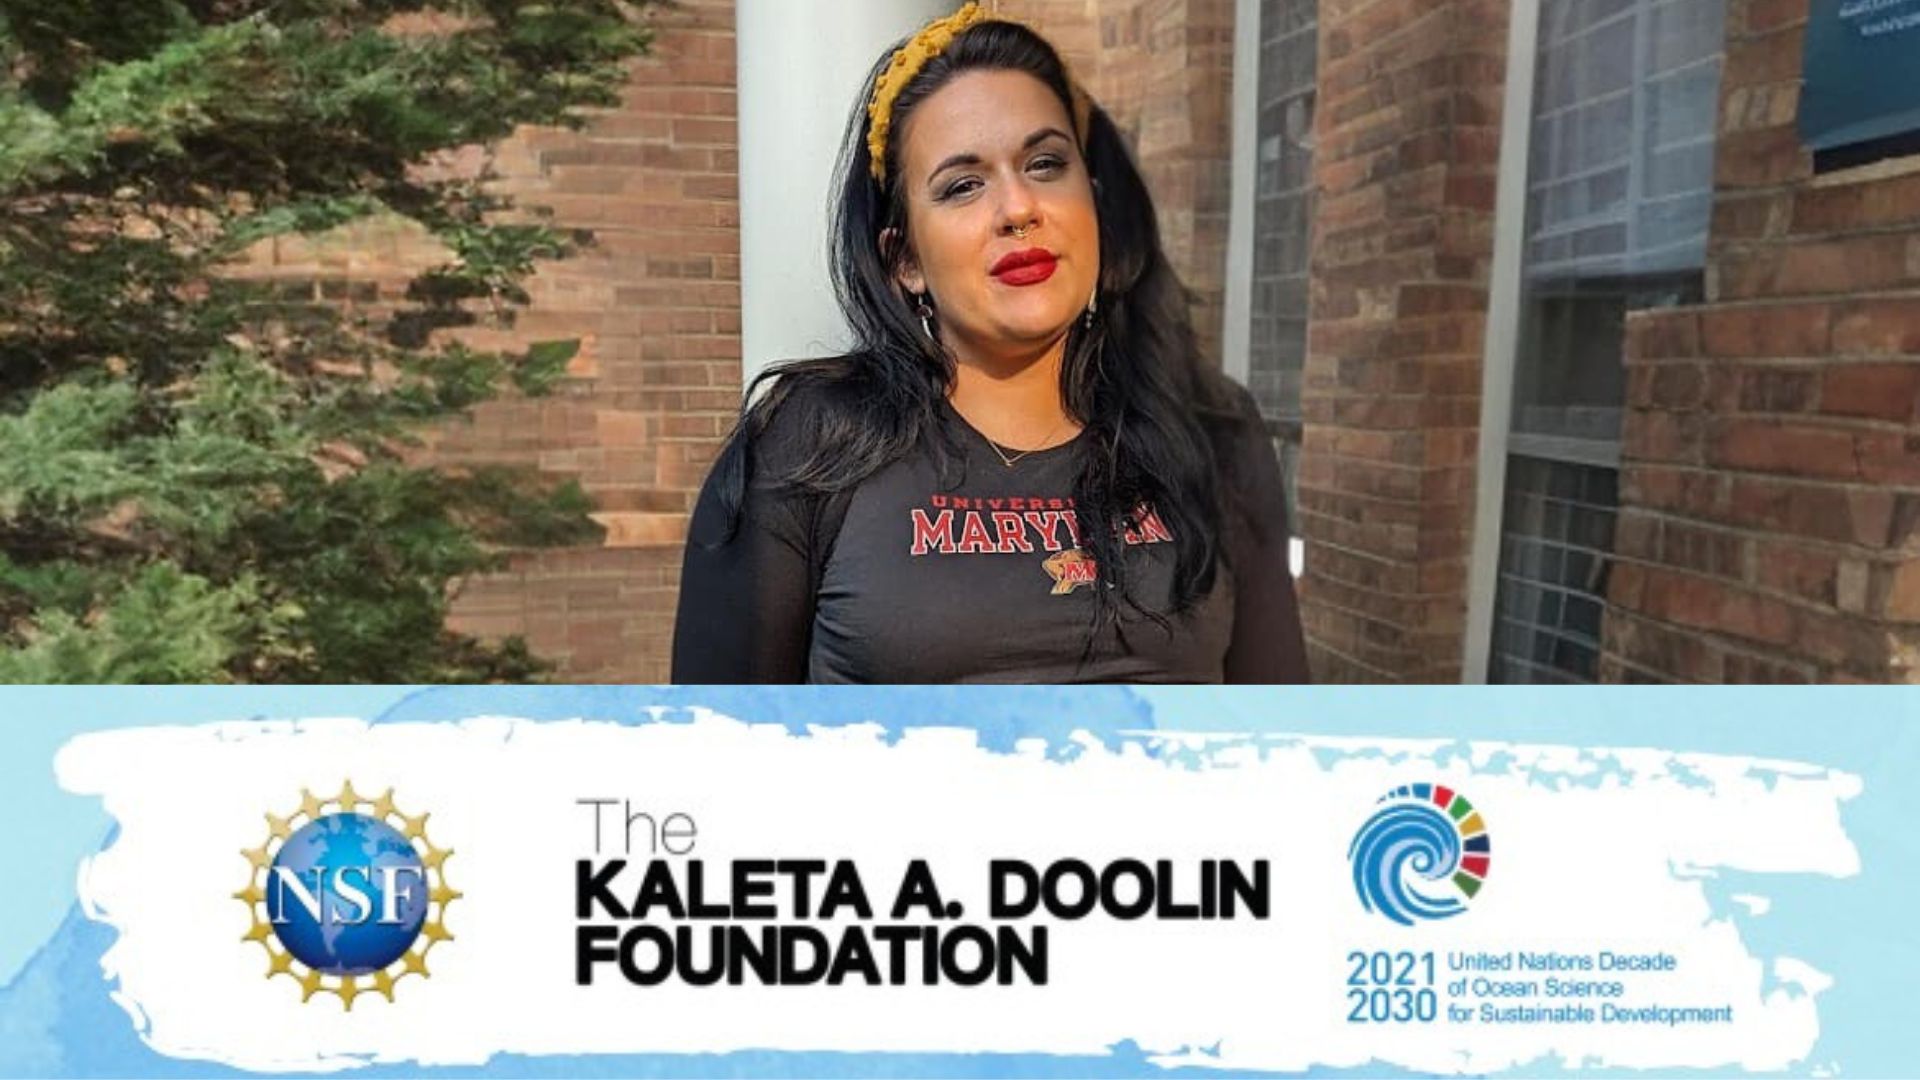 Shelbi Nawhilet Meissner and the logos of National Science Foundation, Kaleta A. Doolin Foundation, and the UN Decade of Ocean Science for Sustainable Development